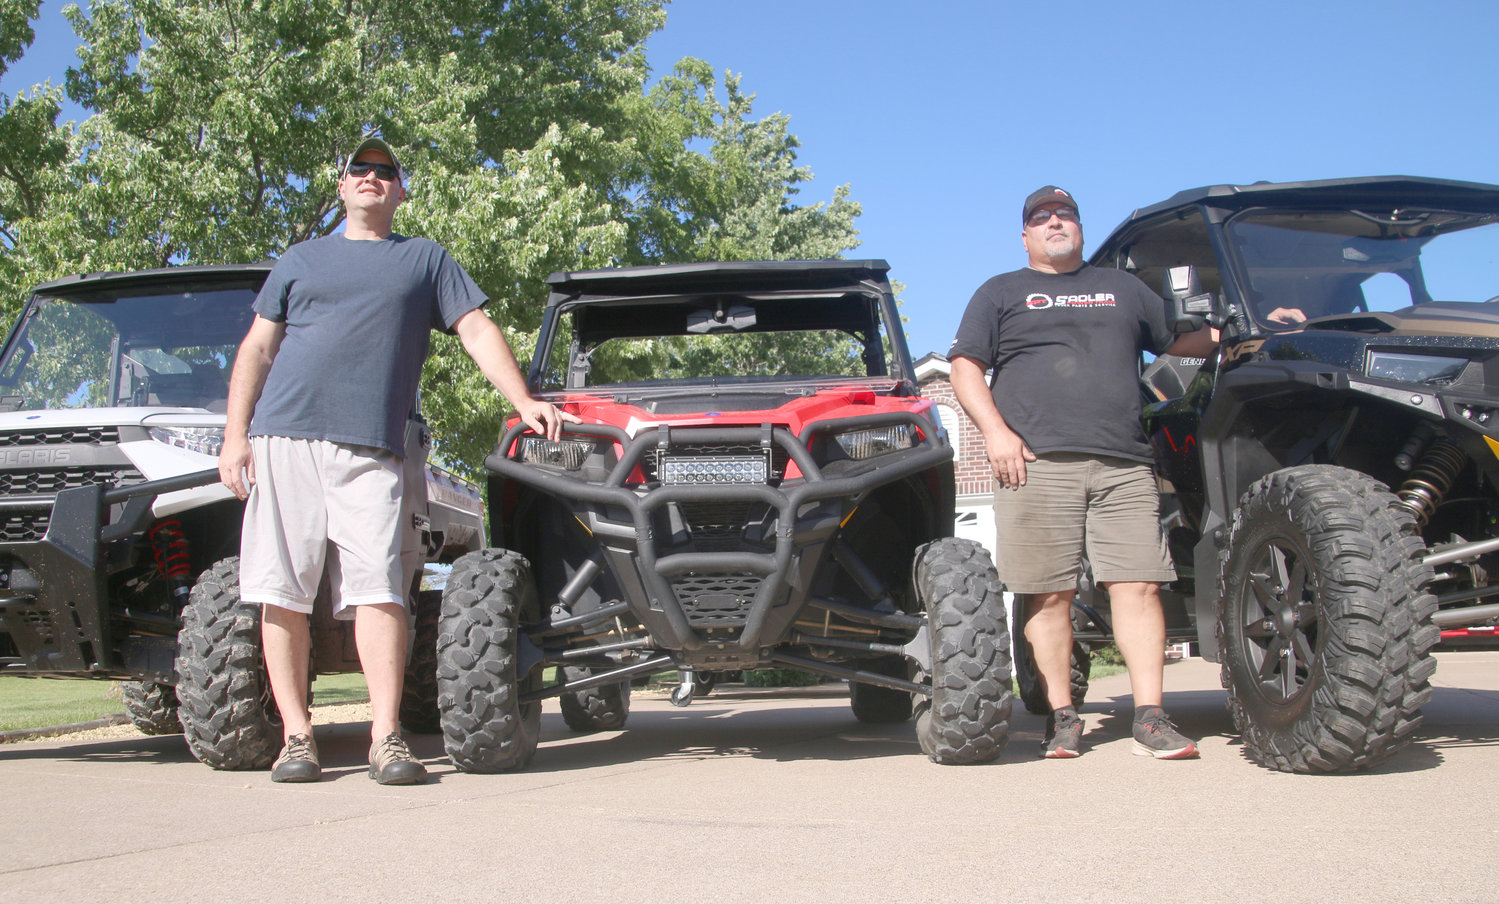 Jason Feller and Marty Scheckel of Long Grove no longer have to trailer their ATVs to reach gravel roads just a block from their homes.